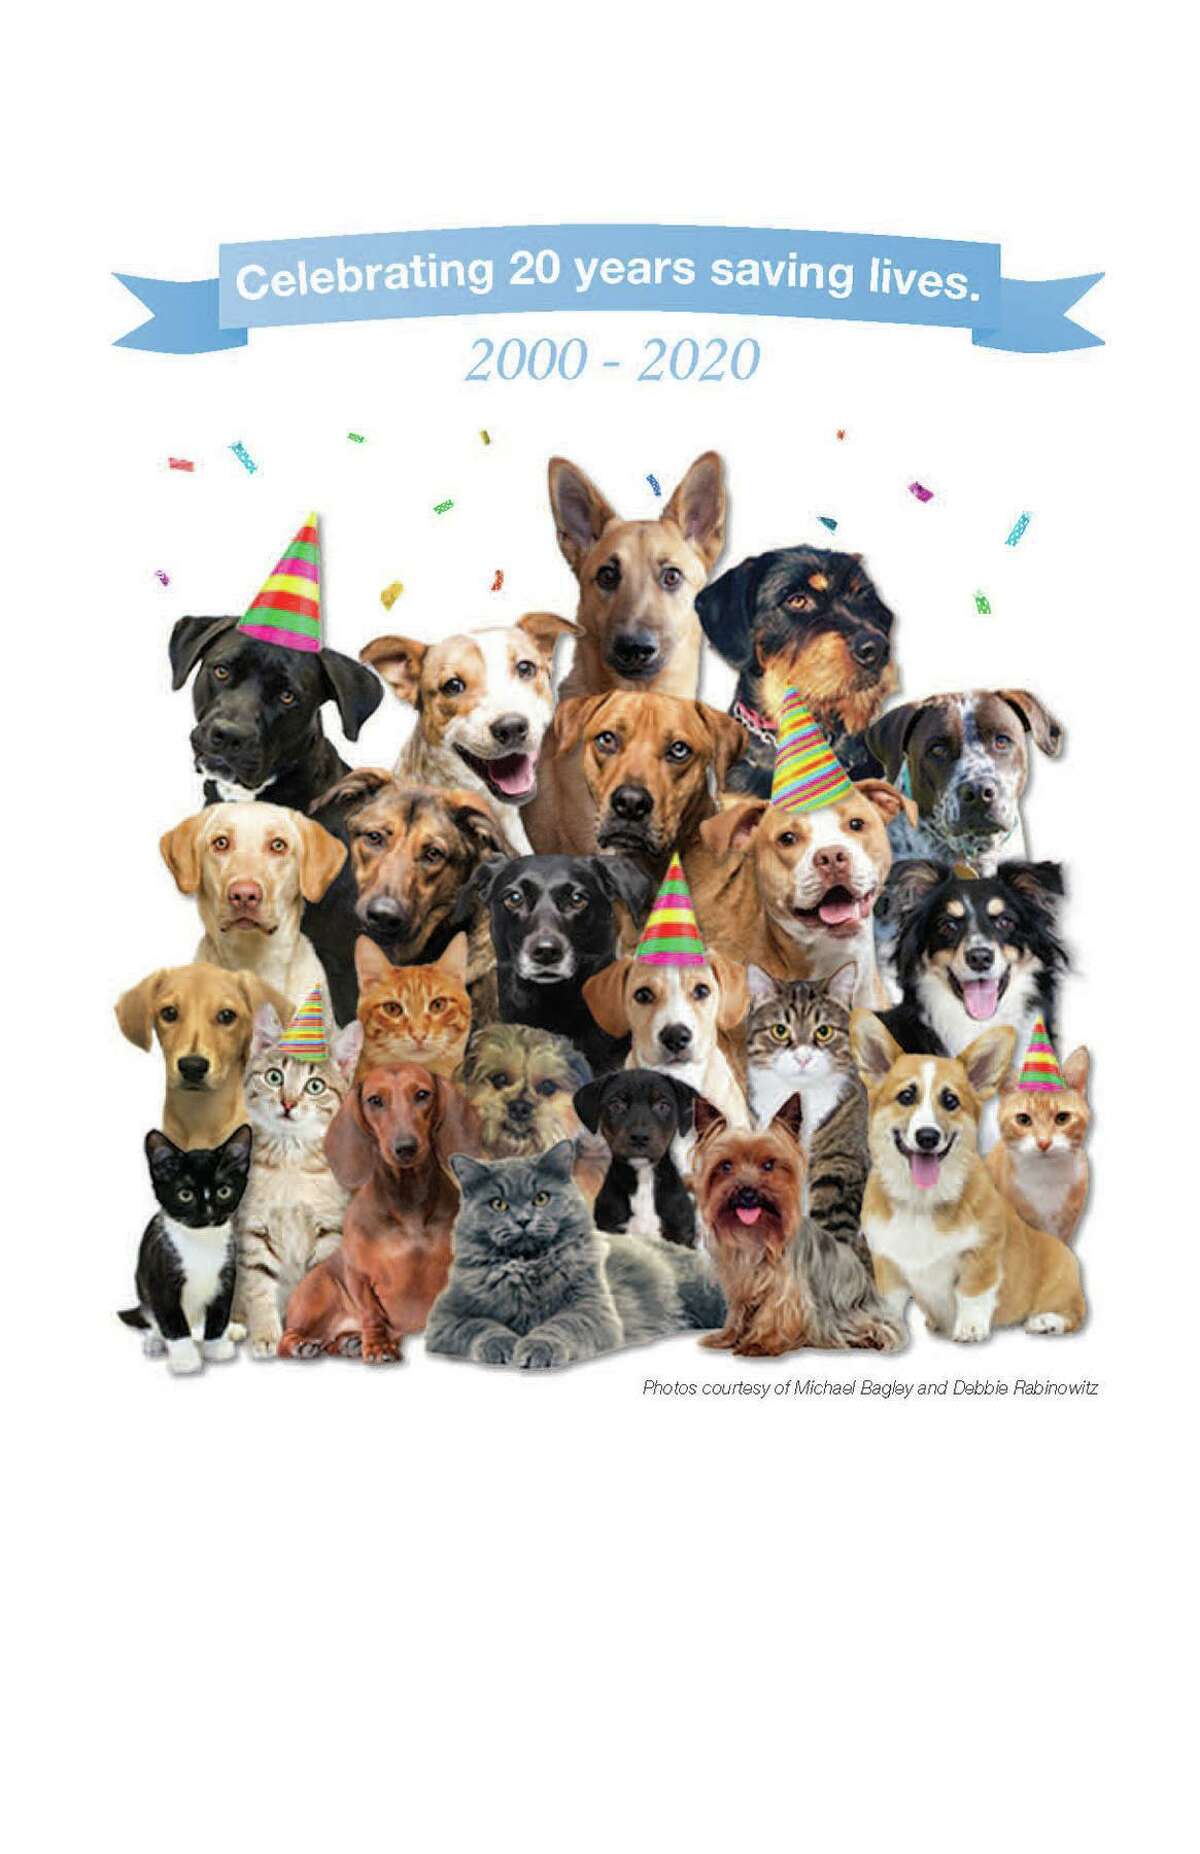 In celebration of its 20th anniversary, Ridgefield Operation for Animal Rescue (ROAR) is launching a new monthly donation drive called “$20 for 20 in 2020.” Donors are being asked to contribute $20 (or more) on the 20th of each remaining month of the year, beginning June 20.